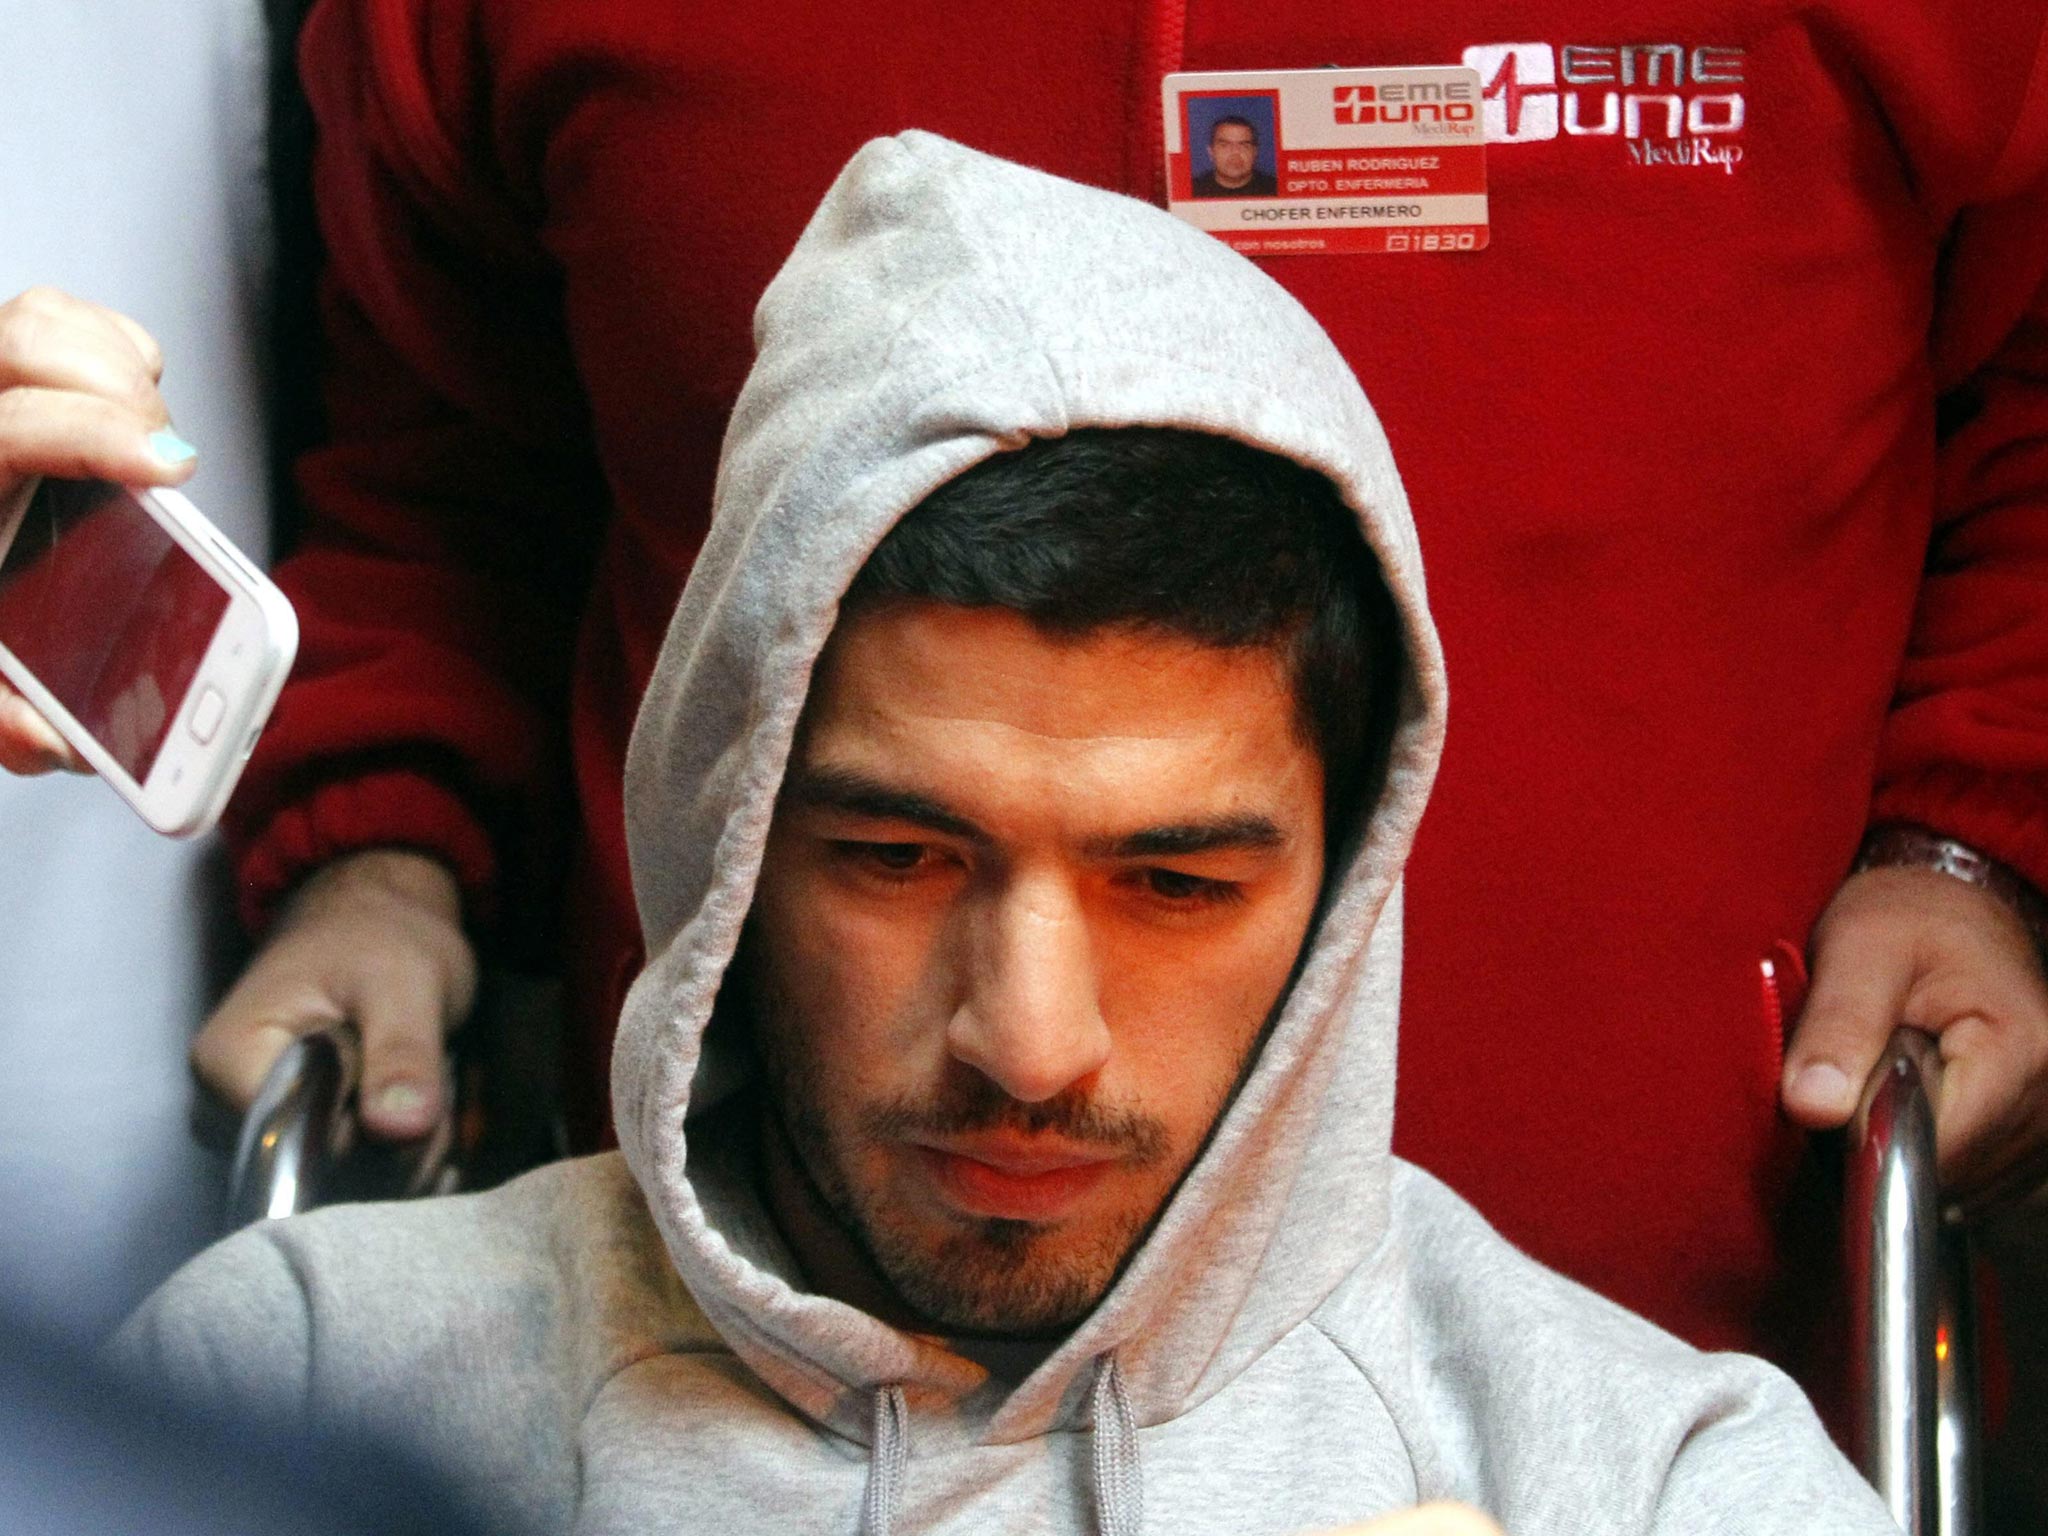 Luis Suarez is moved from Medica Uruguaya hospital after his operation, in Montevideo, Uruguay